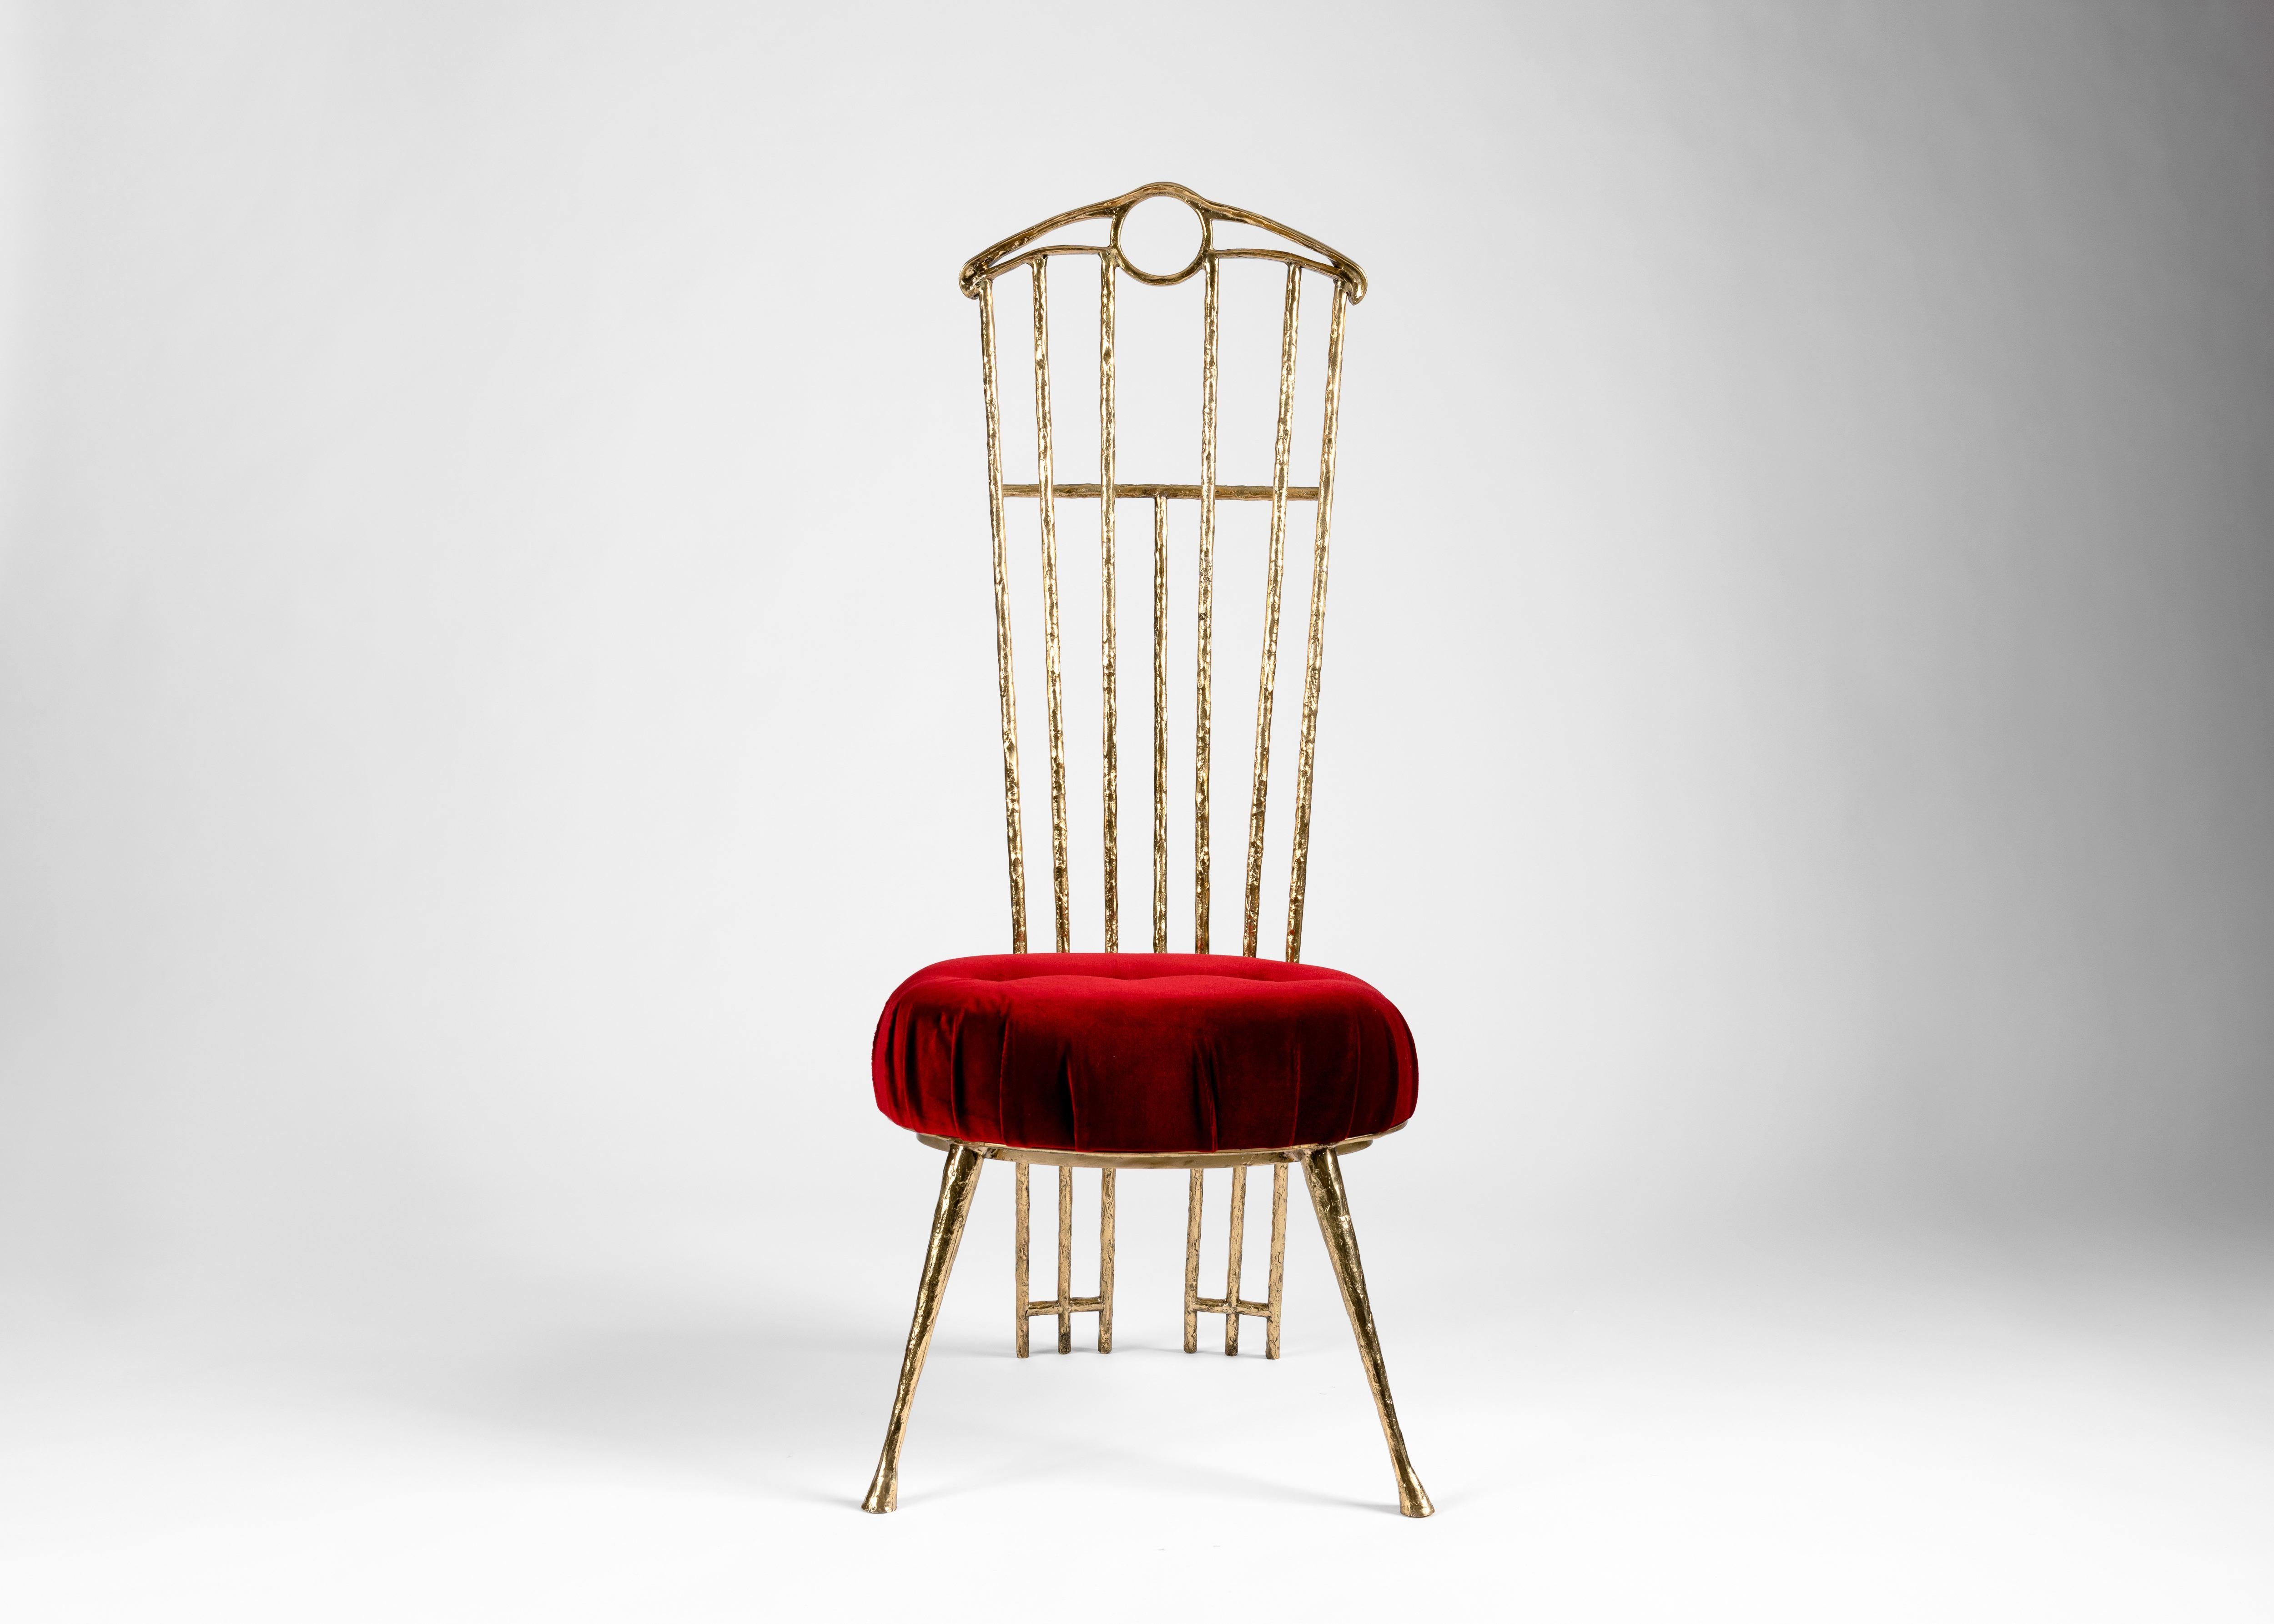 This striking piece is a playful take on formality. The chair's polished bronze, its rigid back, and its red upholstered cushion all suggest a throne, yet it rests upon playful, splayed legs, is executed in compositional lines of wavering